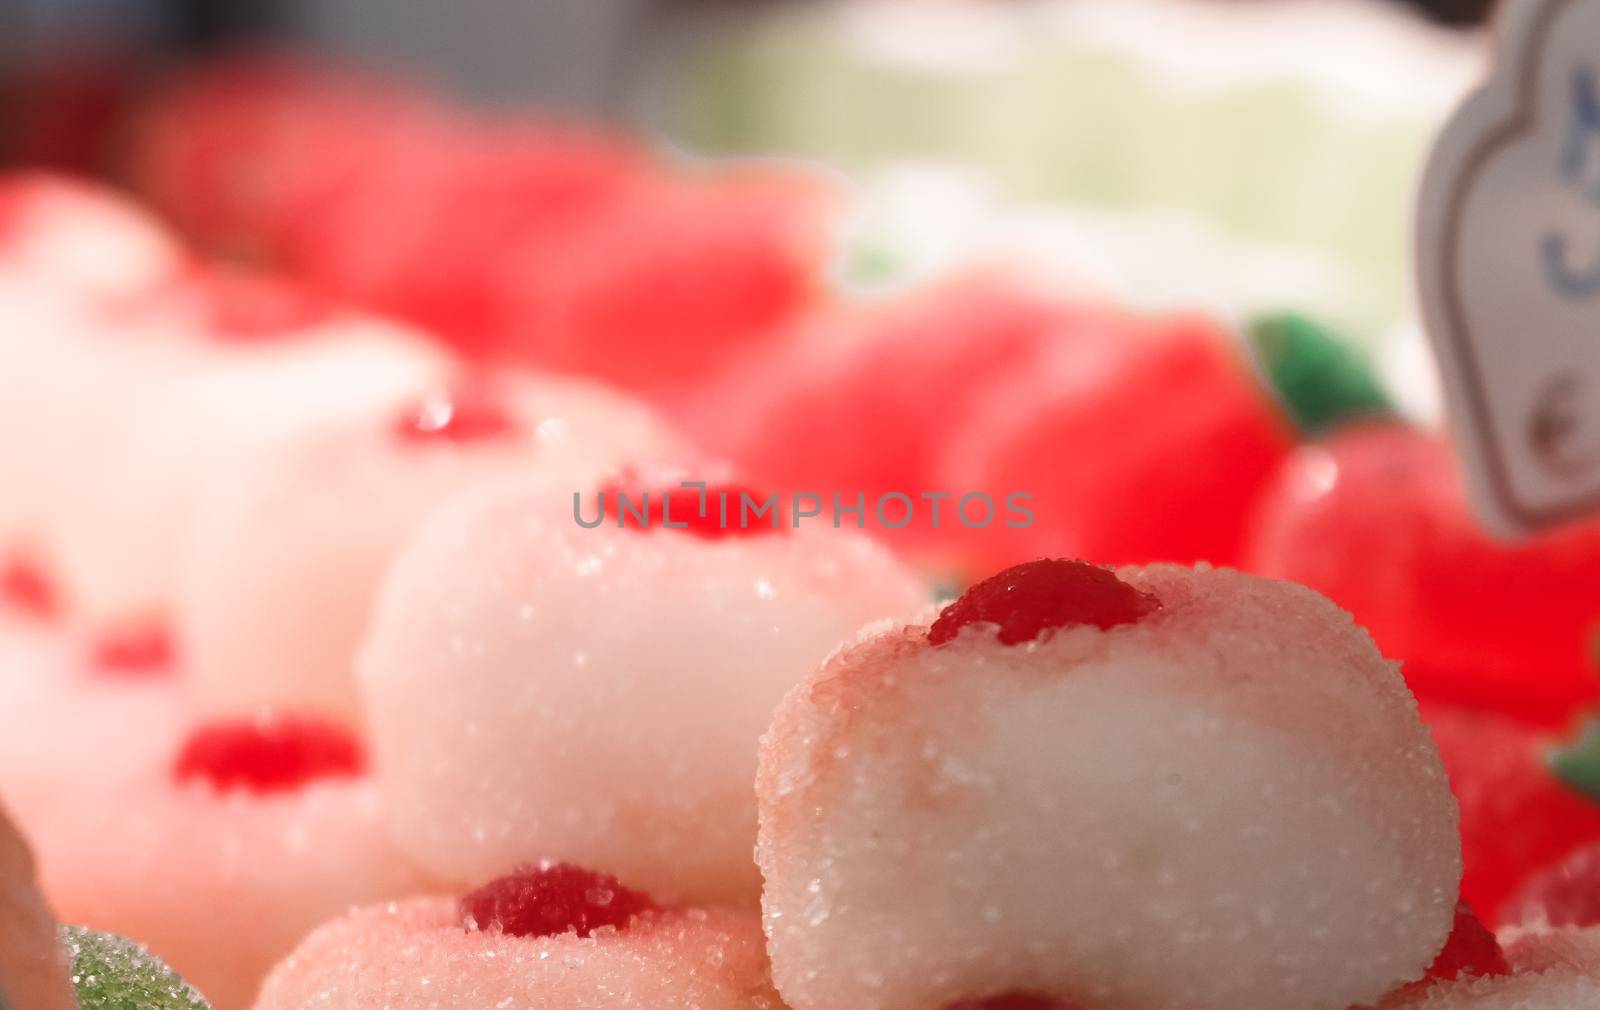 Close up of a sugary cherry jelly sweet in a store window, Florence, Italy. by olifrenchphoto